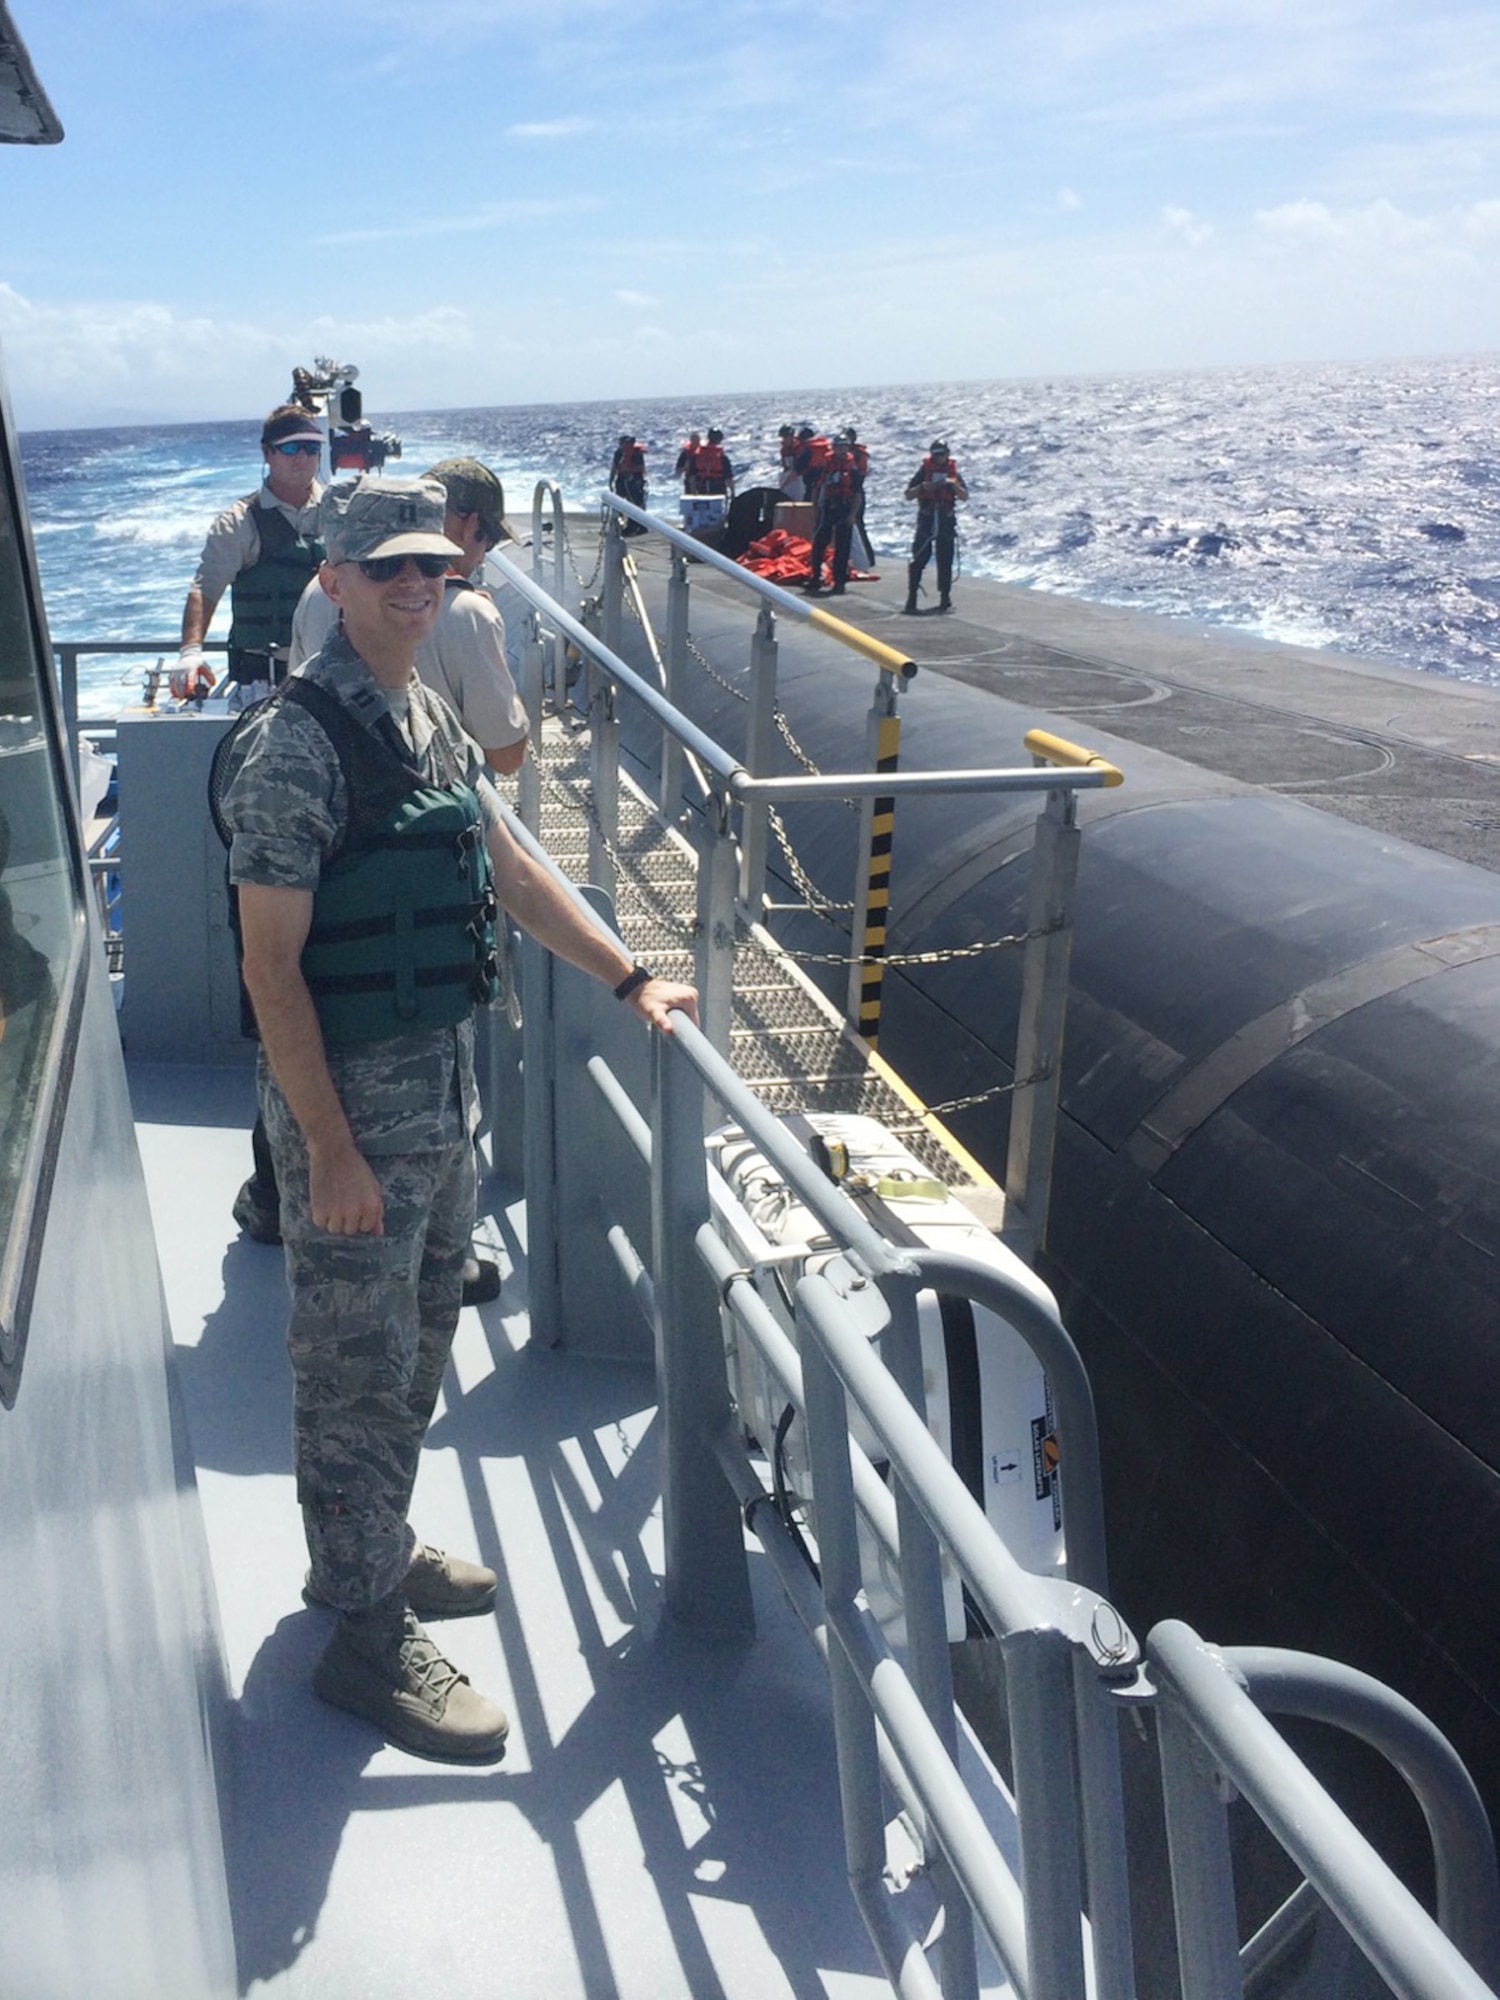 Capt. Cody daMota poses for a photo aboard the Personnel Transfer Vessel Malama during an open-ocean personnel transfer with a ballistic missile submarine, Aug. 15, 2015. DaMota is one of the first four Air Force intercontinental ballistic missile officers selected to serve with U.S. Navy Submarine Forces ballistic missile submarine units through the Striker Trident nuclear officer exchange program. (U.S. Air Force photo/Capt. Patrick McAfee)